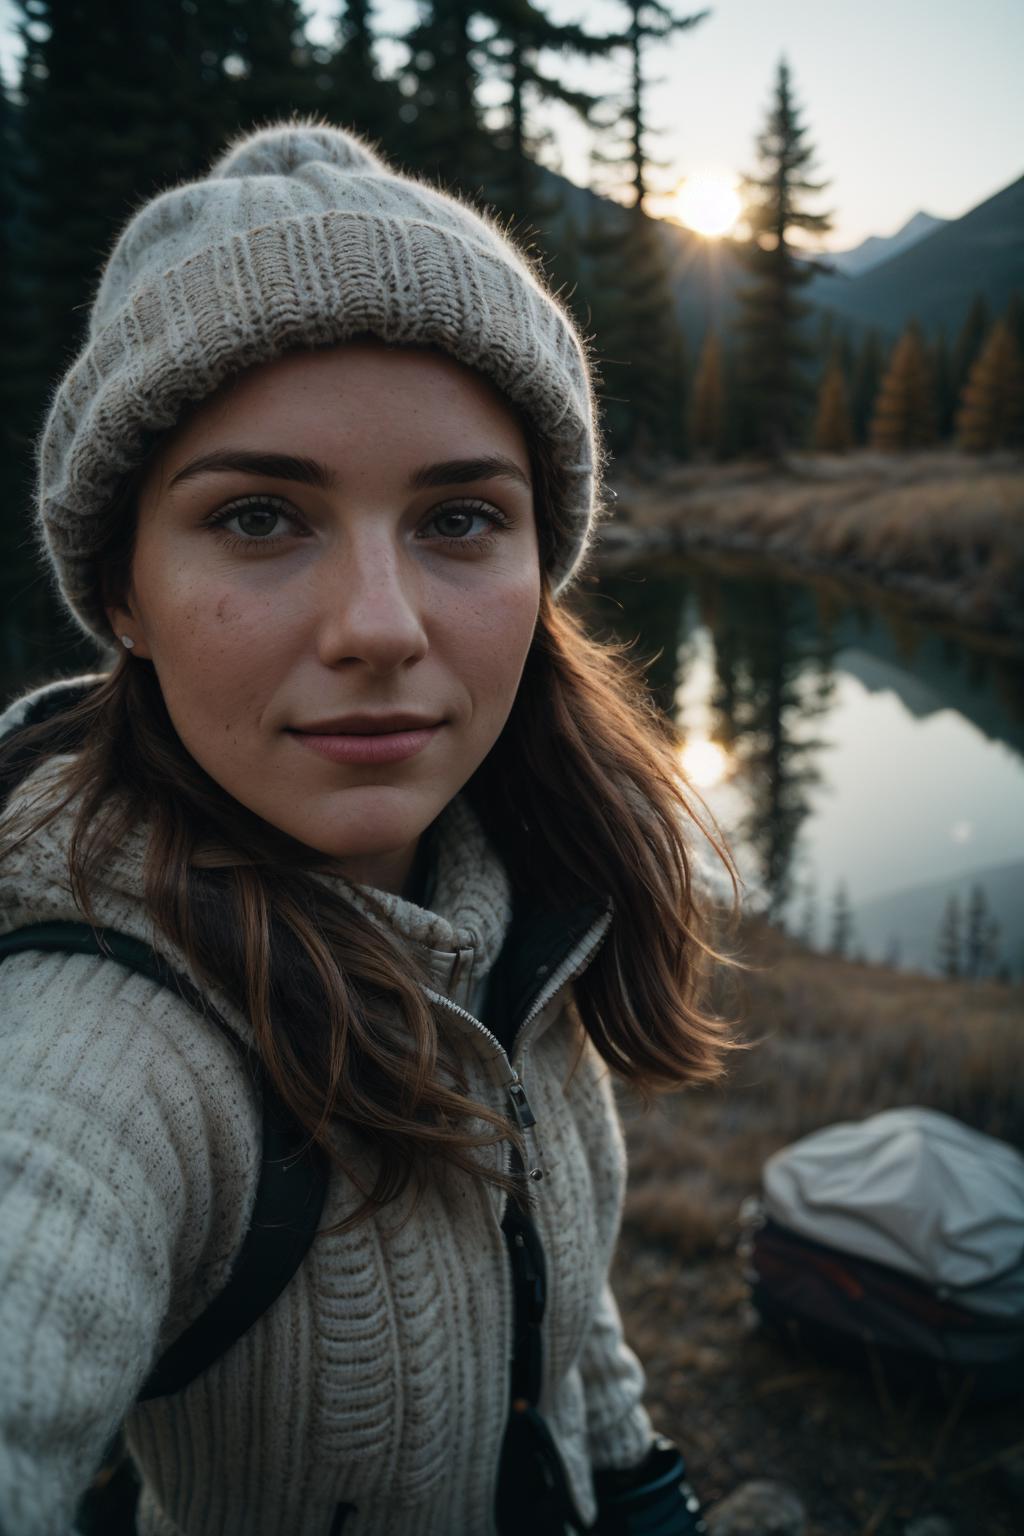 A woman wearing a beanie and a backpack is standing in front of a lake.